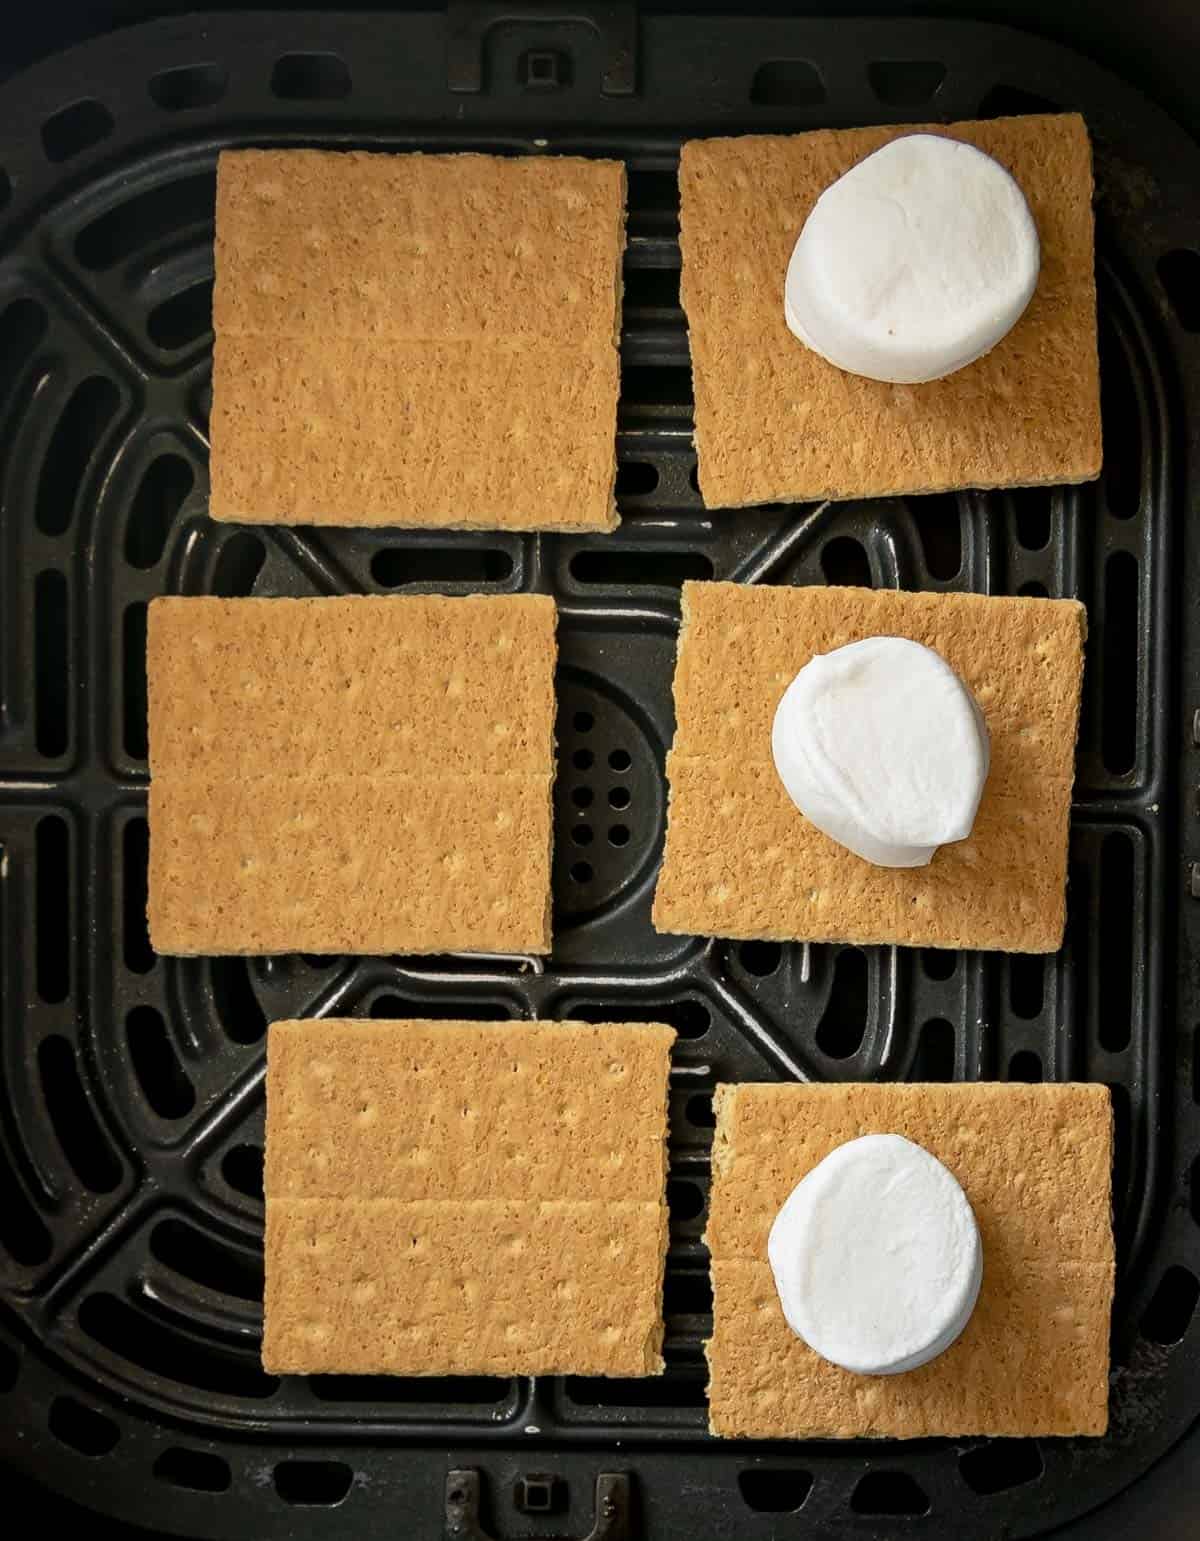 Marshmallows and graham crackers in the air fryer basket